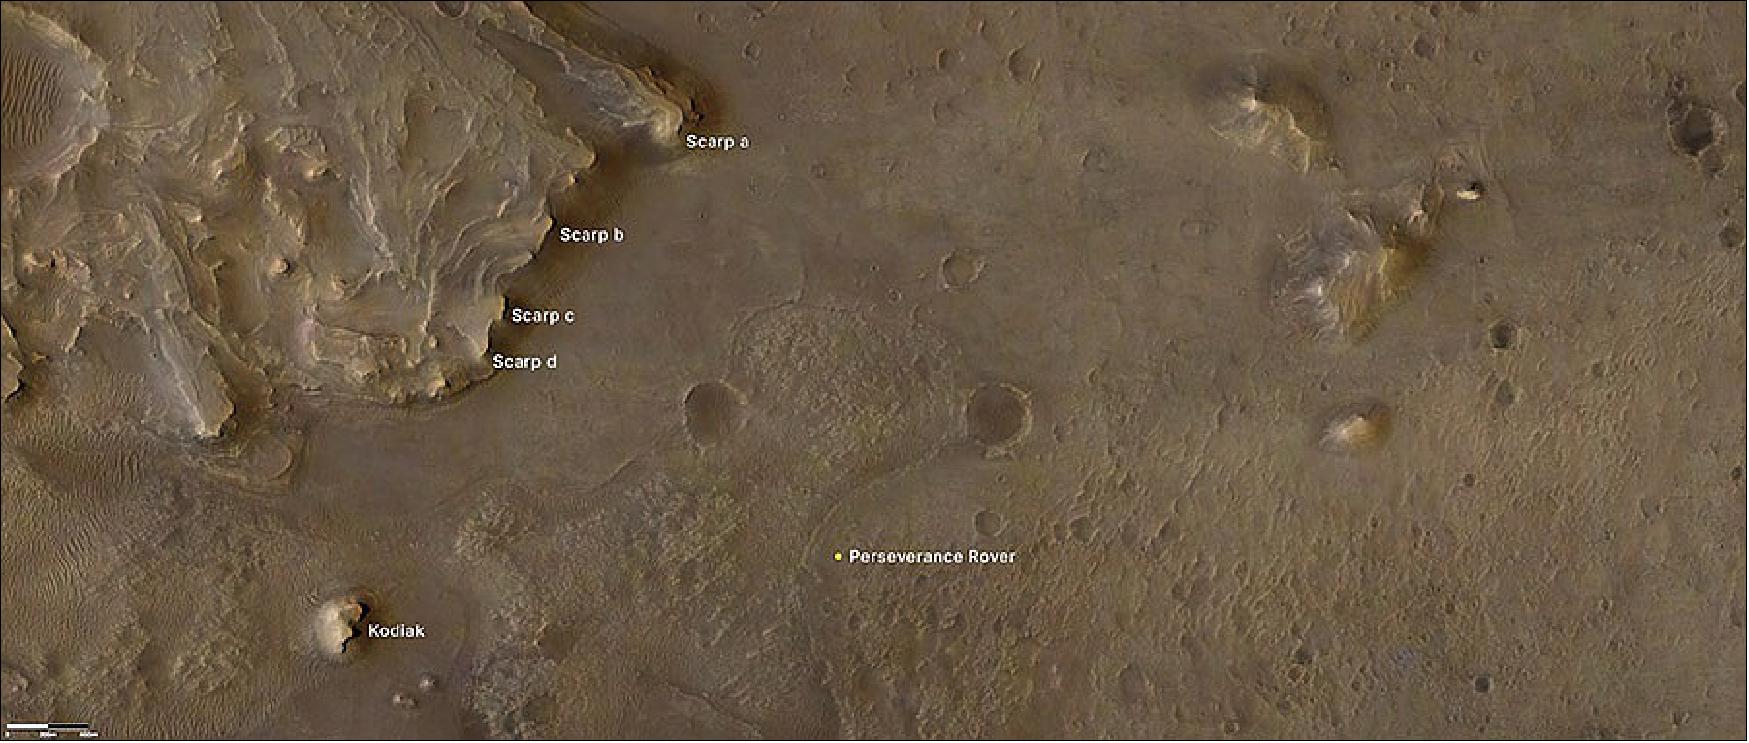 Figure 4: This overhead view of part of Jezero Crater comes from NASA's Mars Reconnaissance Orbiter. The Perseverance rover is located at center bottom. Kodiak Butte is to the lower left, and scarps (labeled a–d) along the delta are on the upper left (image credit: NASA/JPL-Caltech/University of Arizona/USGS)